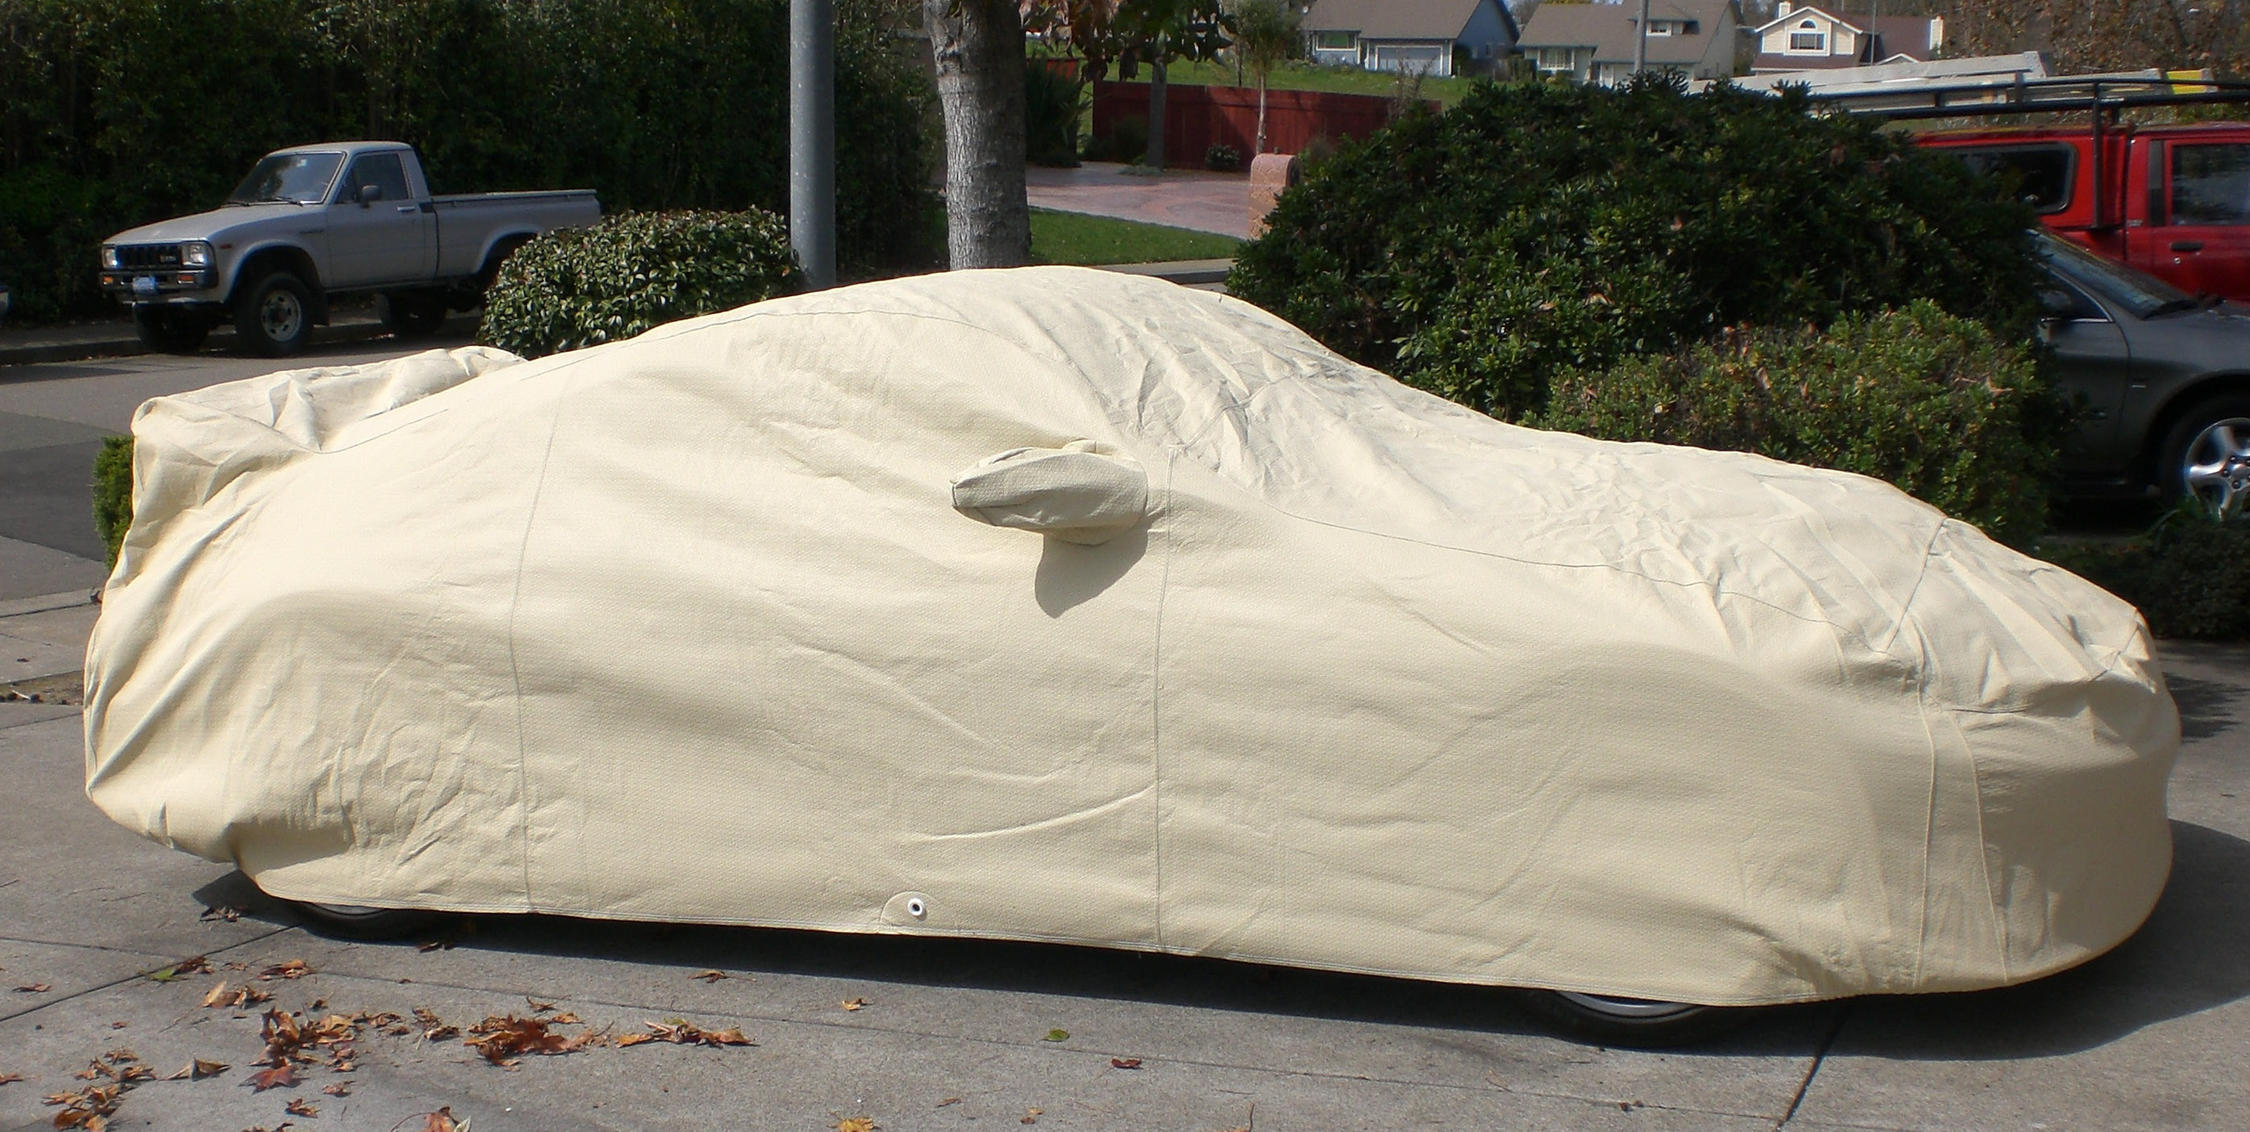 https://my350z.com/forum/attachments/nismo-350z/232102d1237063616-nismo-car-cover-from-the-zstore-car-cover1.jpg